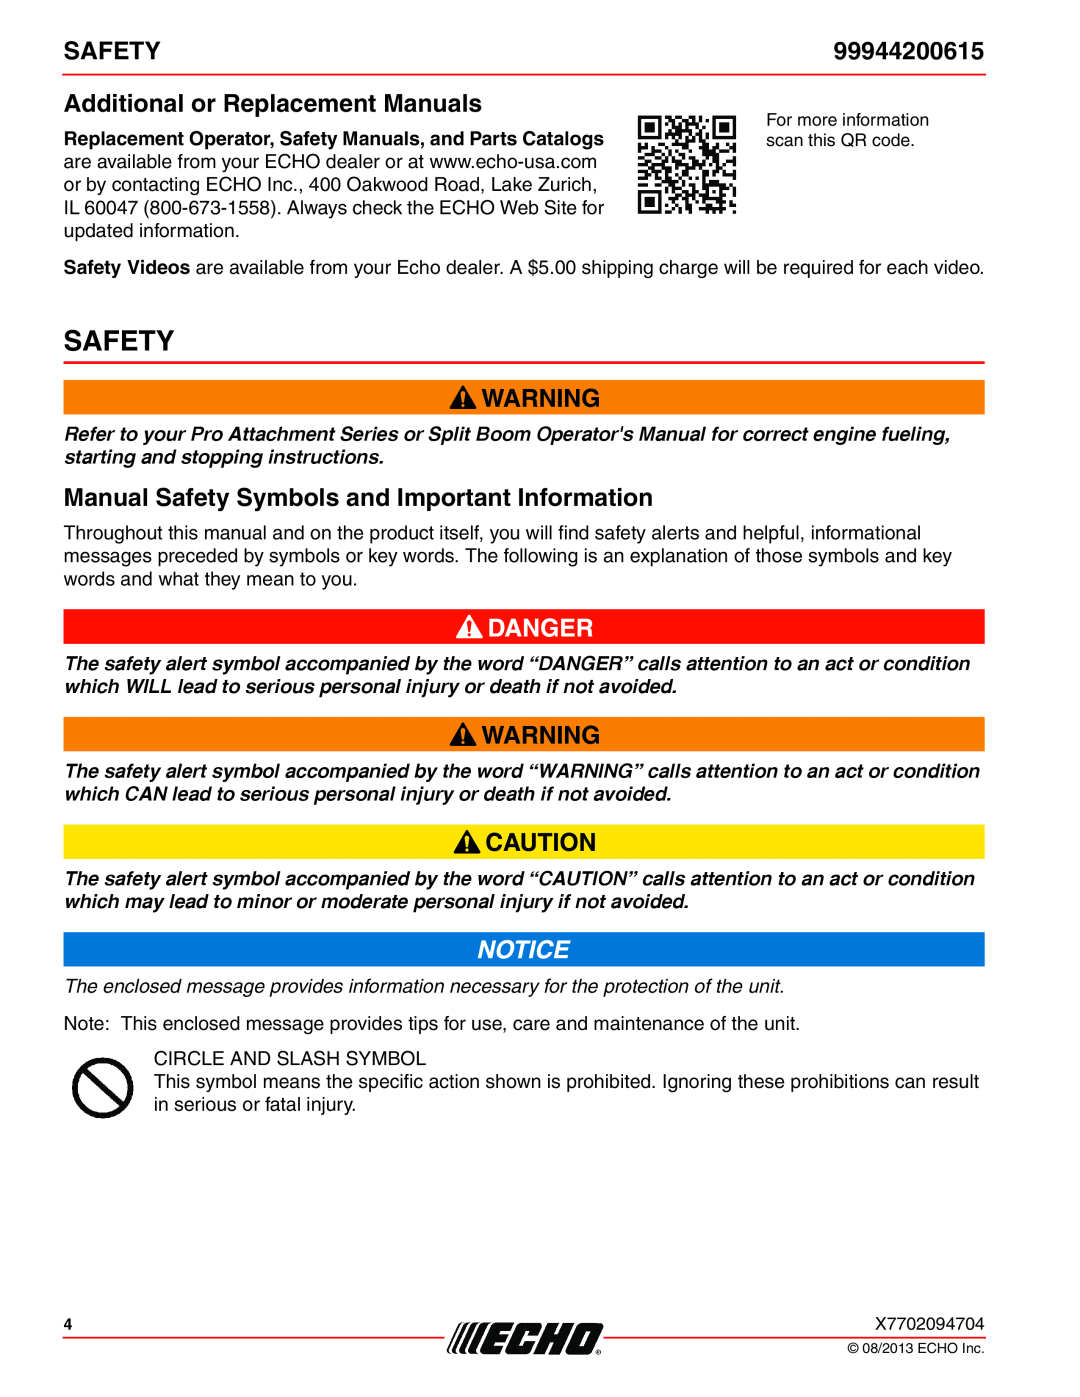 Echo 2400, 260, 261, 231 99944200615, Additional or Replacement Manuals, Manual Safety Symbols and Important Information 